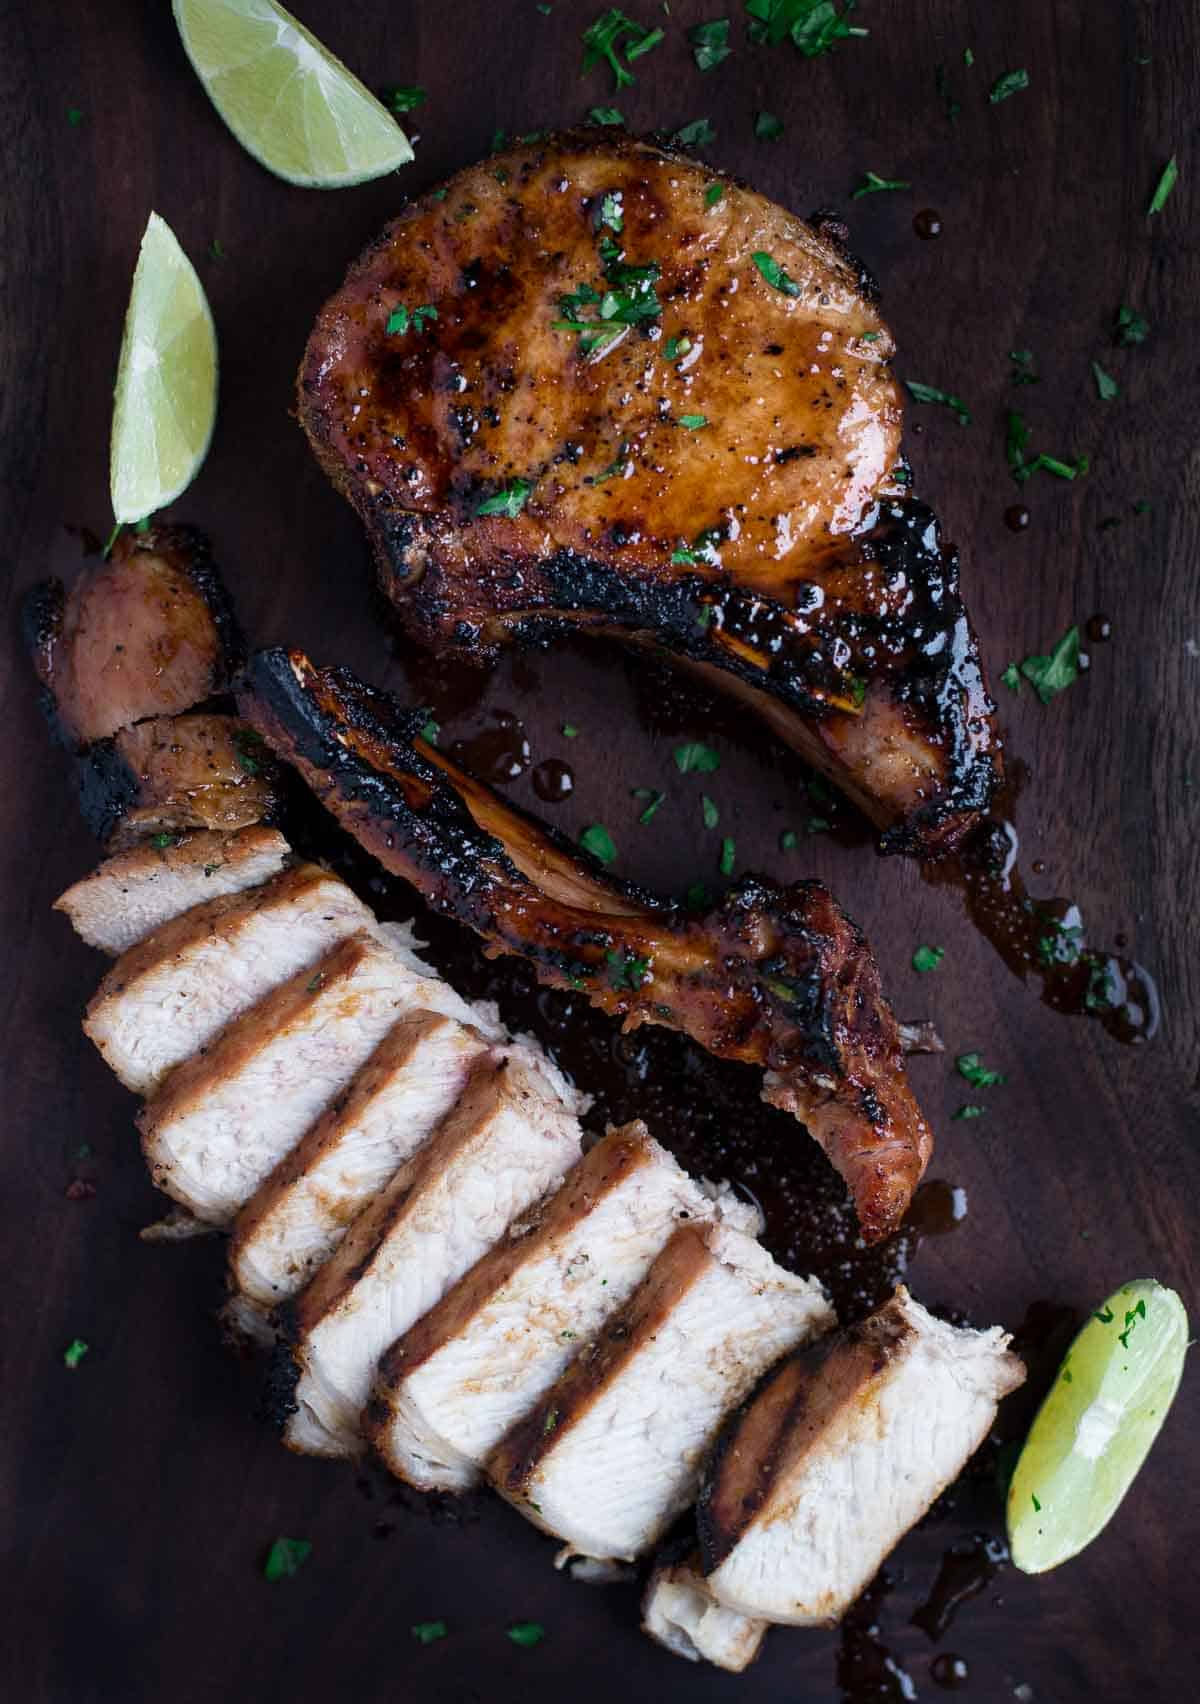 Sliced grilled pork chop with a maple and soy glaze.